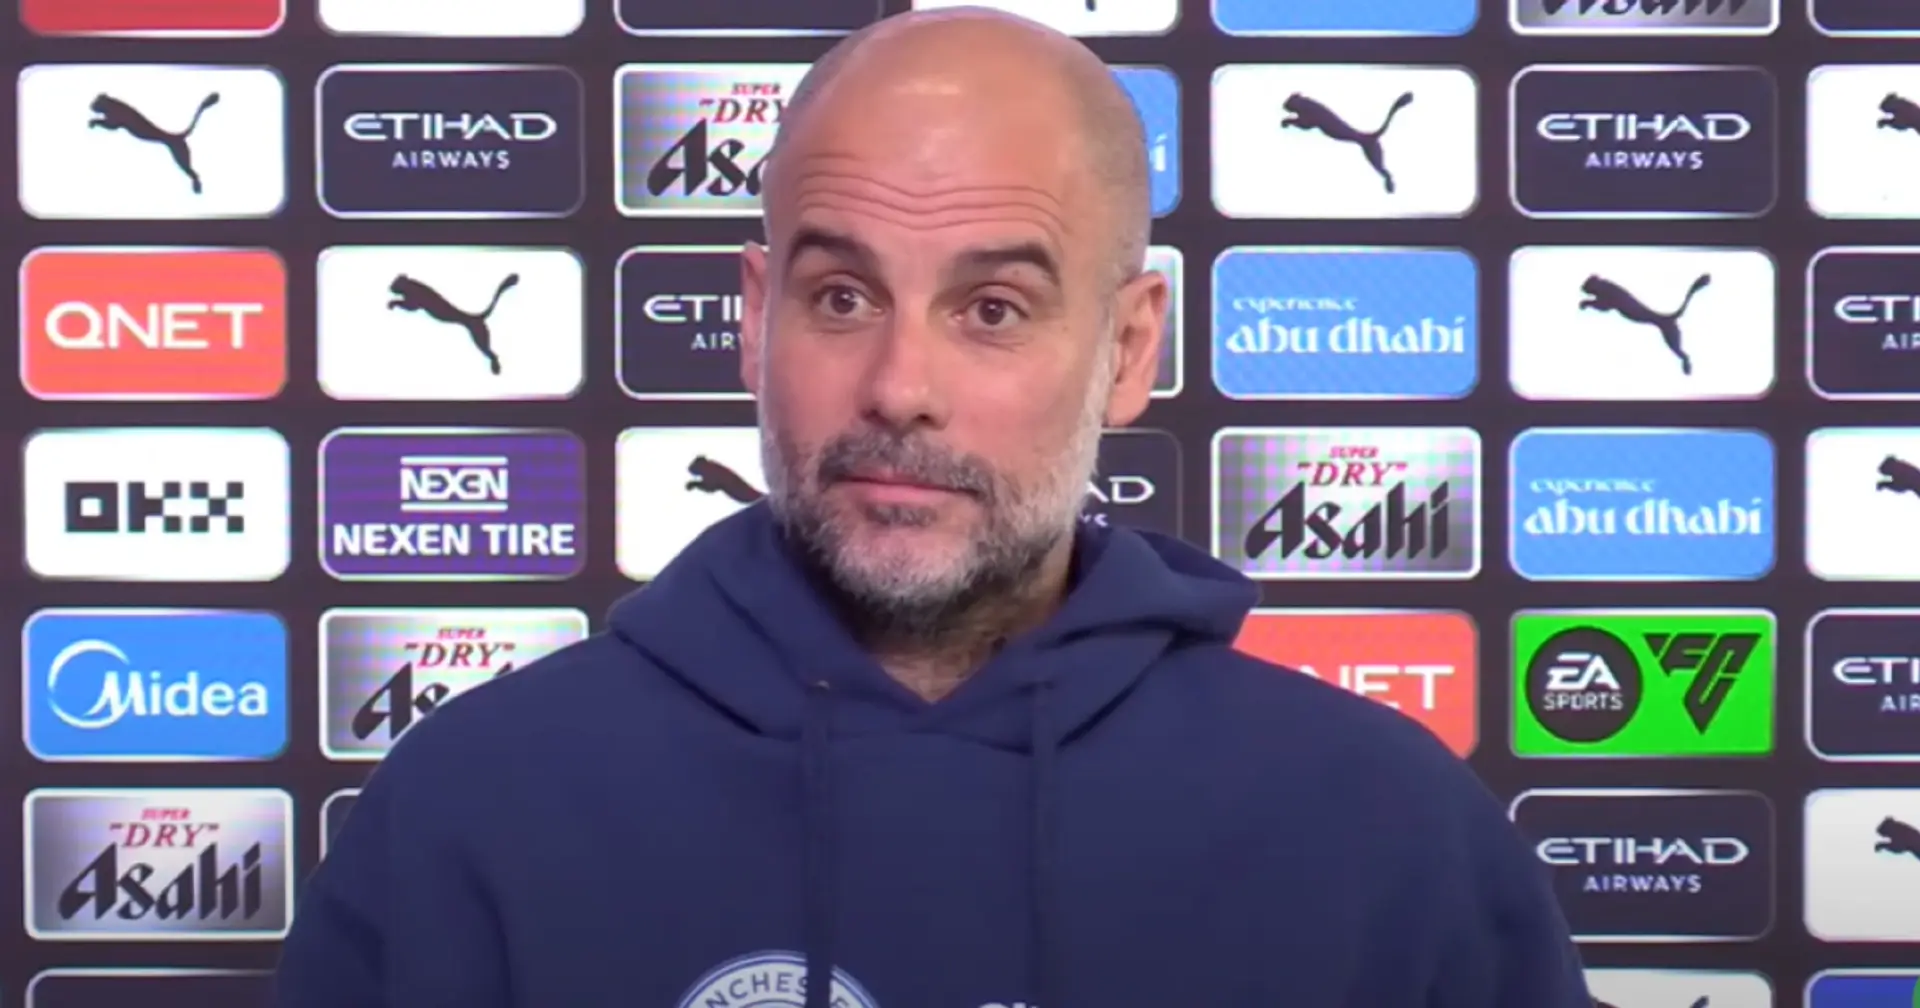 'Don’t train, rest and massage': Pep Guardiola reveals what Man City have to do to avoid injuries